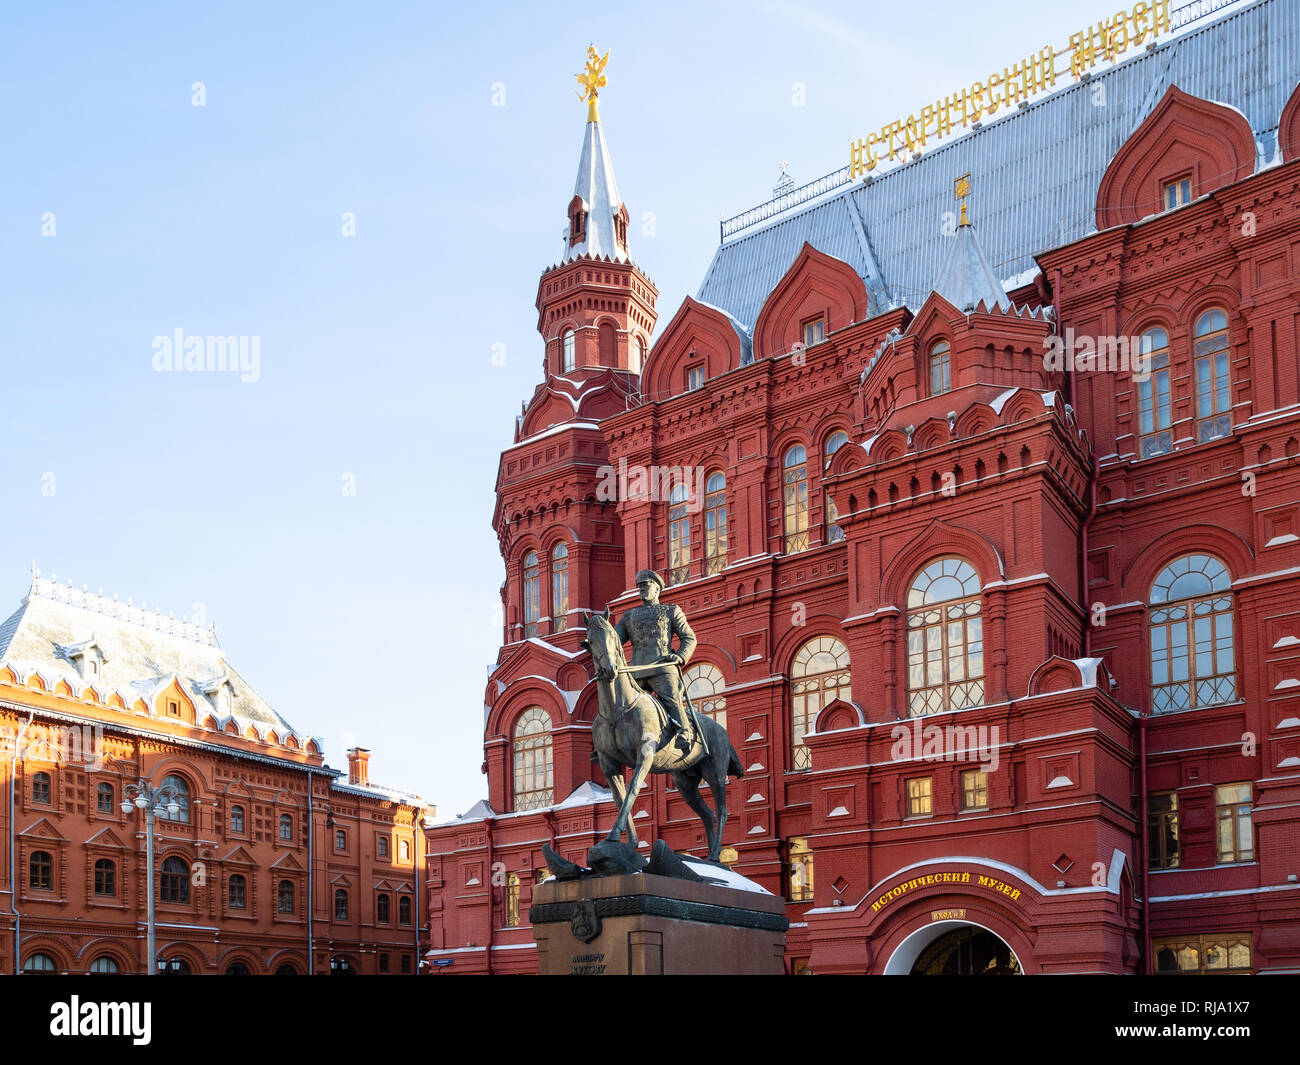 MOSCOW, RUSSIA - JANUARY 25, 2019: Monument of Soviet Commander Marshal Georgy Zhukov near State Historical Museum and former City Hall building at Ma Stock Photo